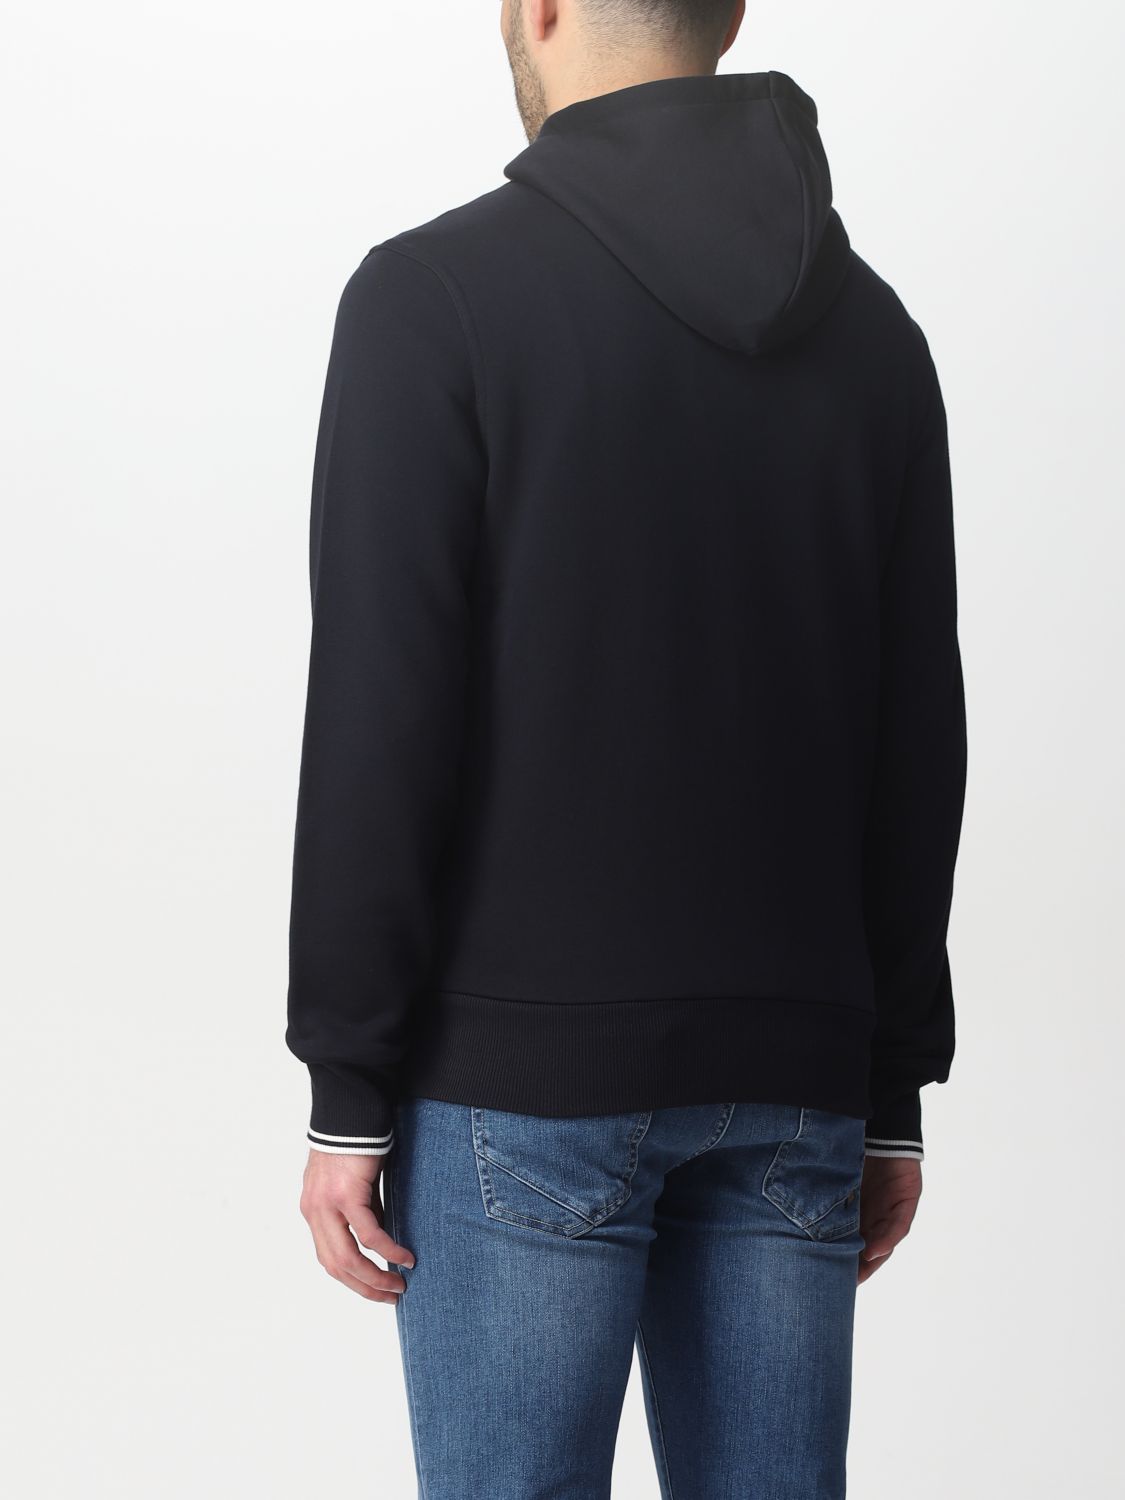 Sweatshirt Fred Perry: Fred Perry cotton Jumper navy 2